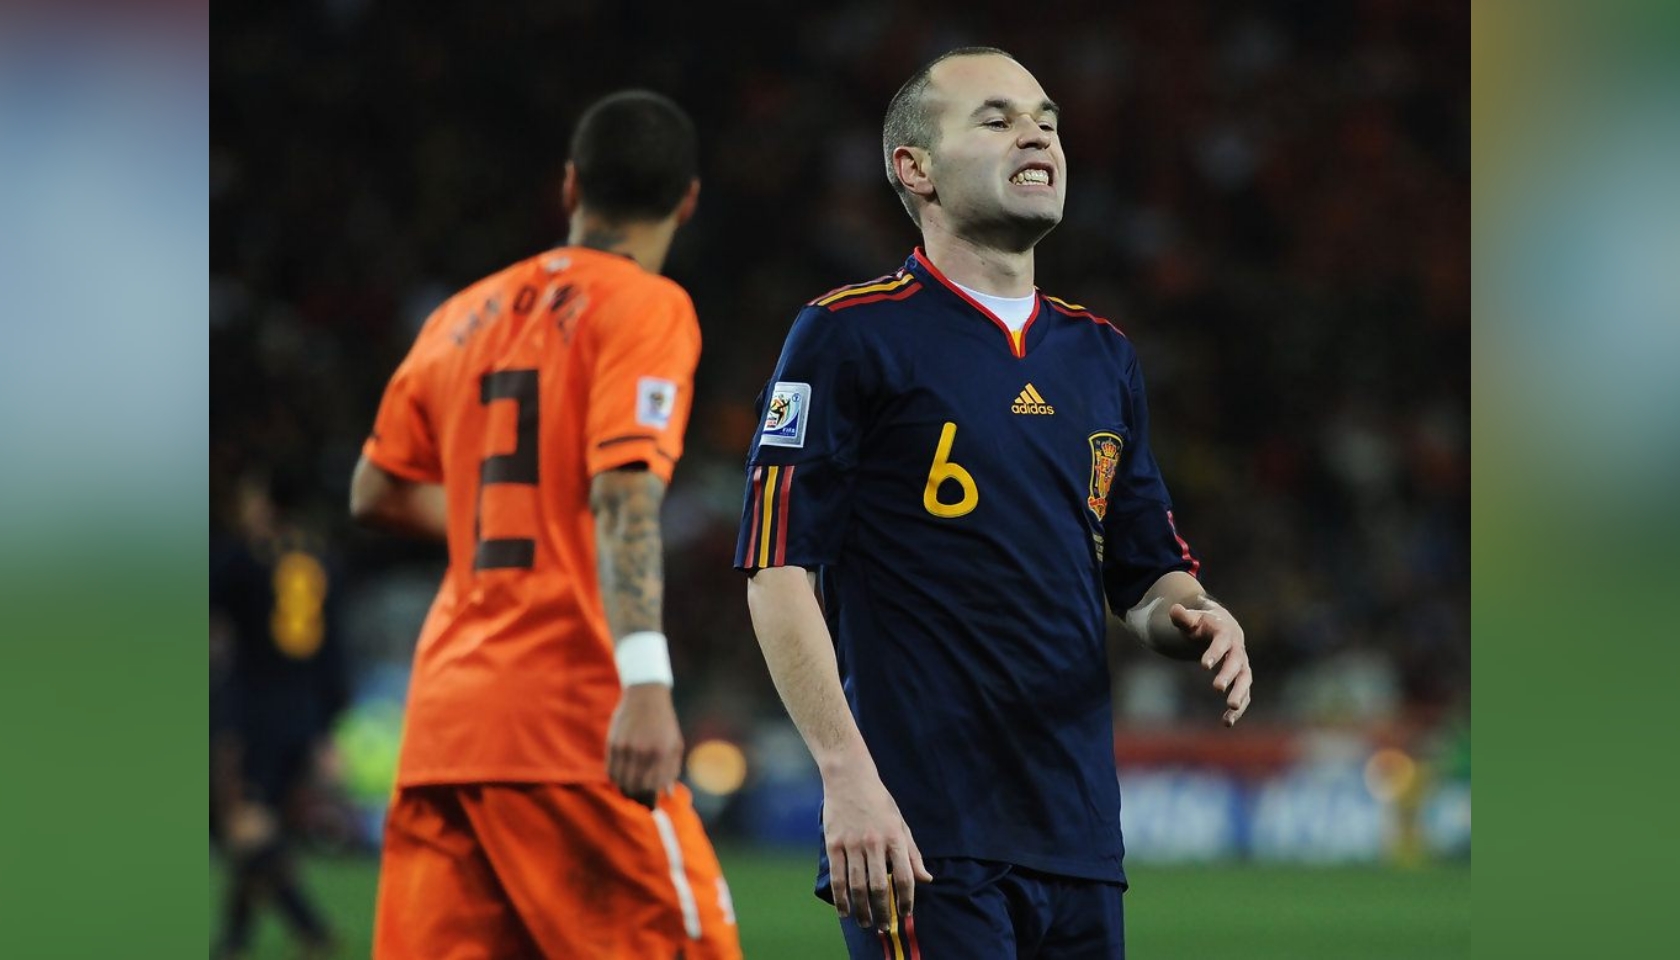 andres iniesta shirt world cup